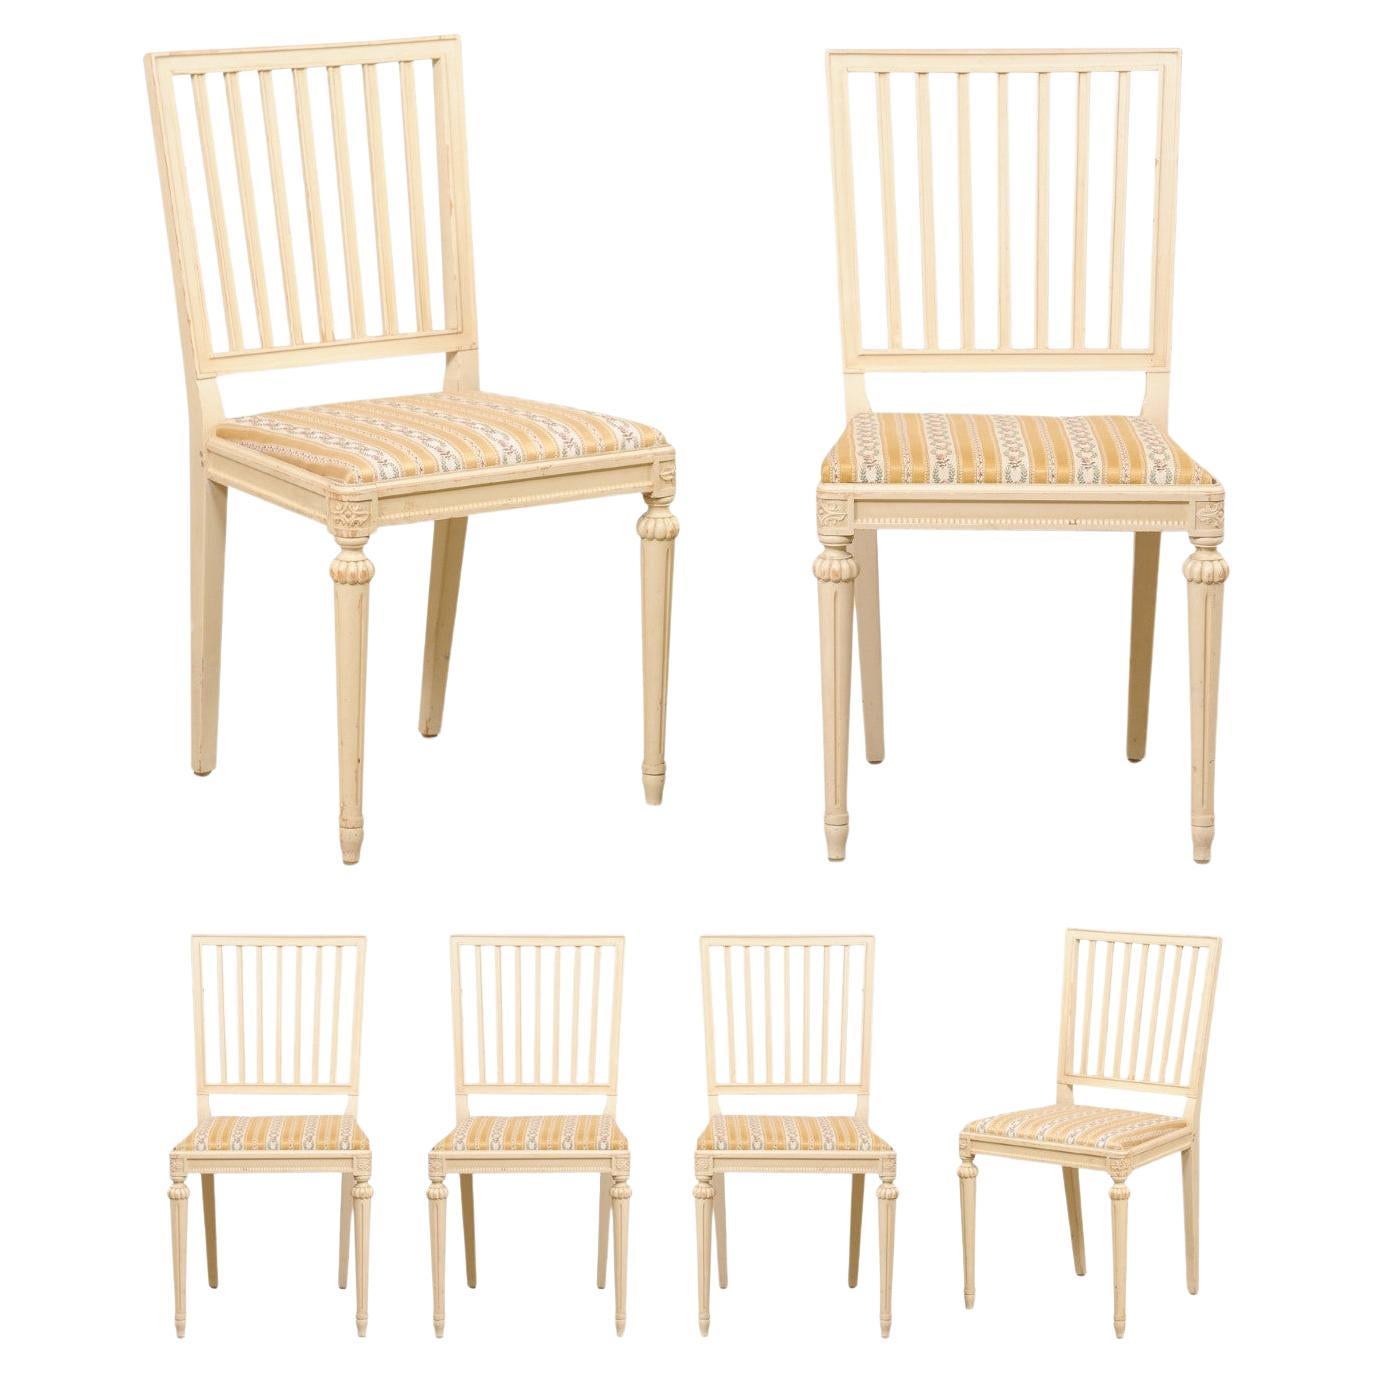 Swedish Set of Six Carved-Wood Side Chairs with Upholstered Seats, Cream Finish